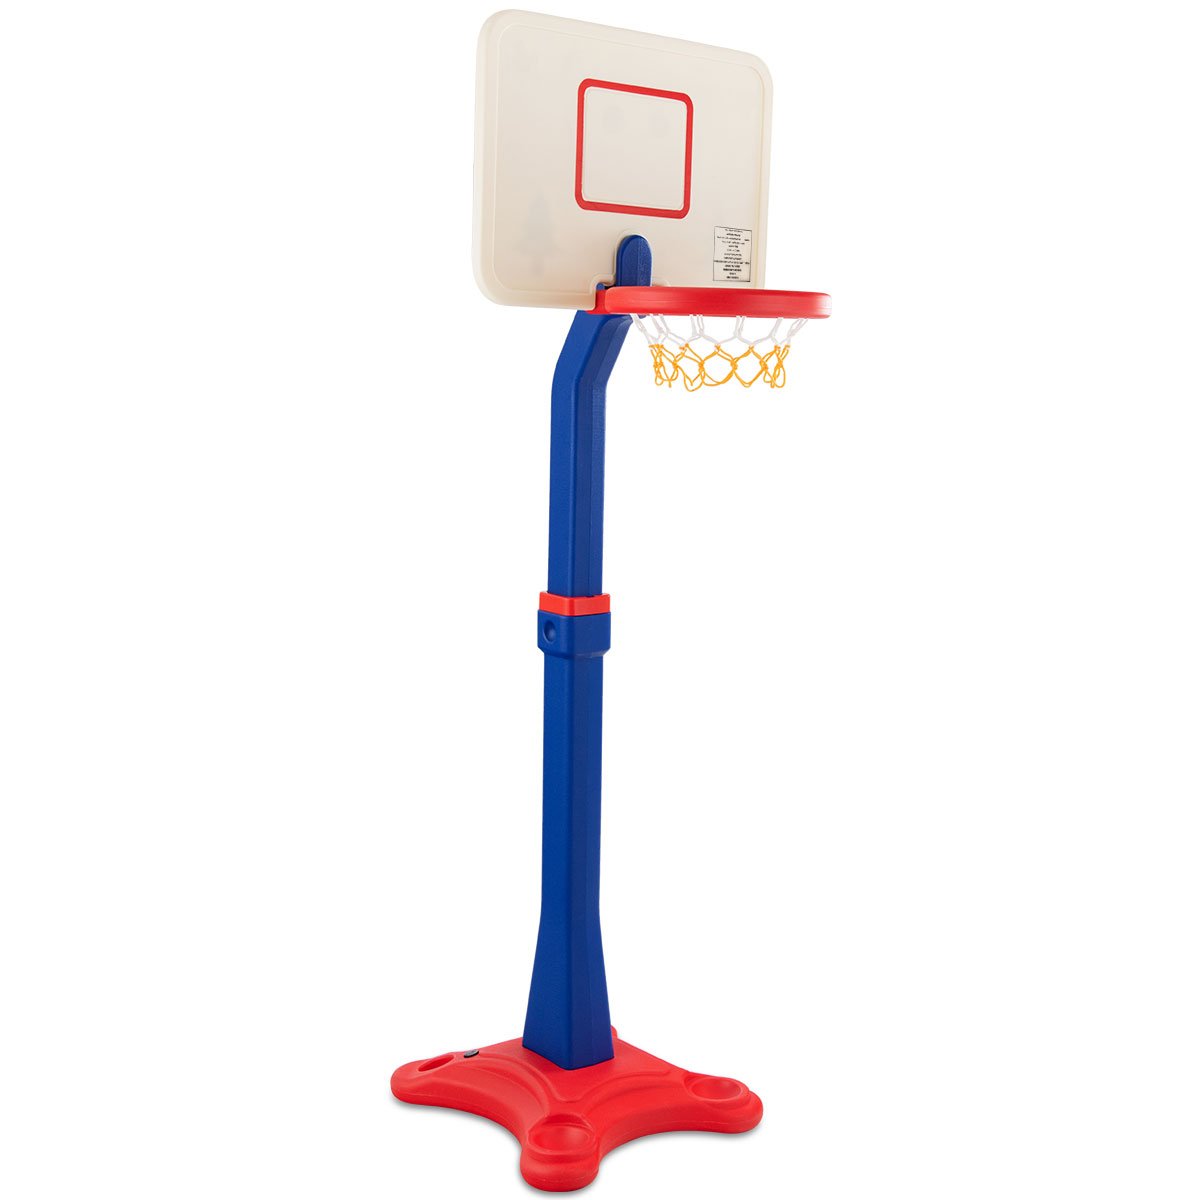 Active Fun for Kids: Height Adjustable Toddler Basketball Hoop Stand Set